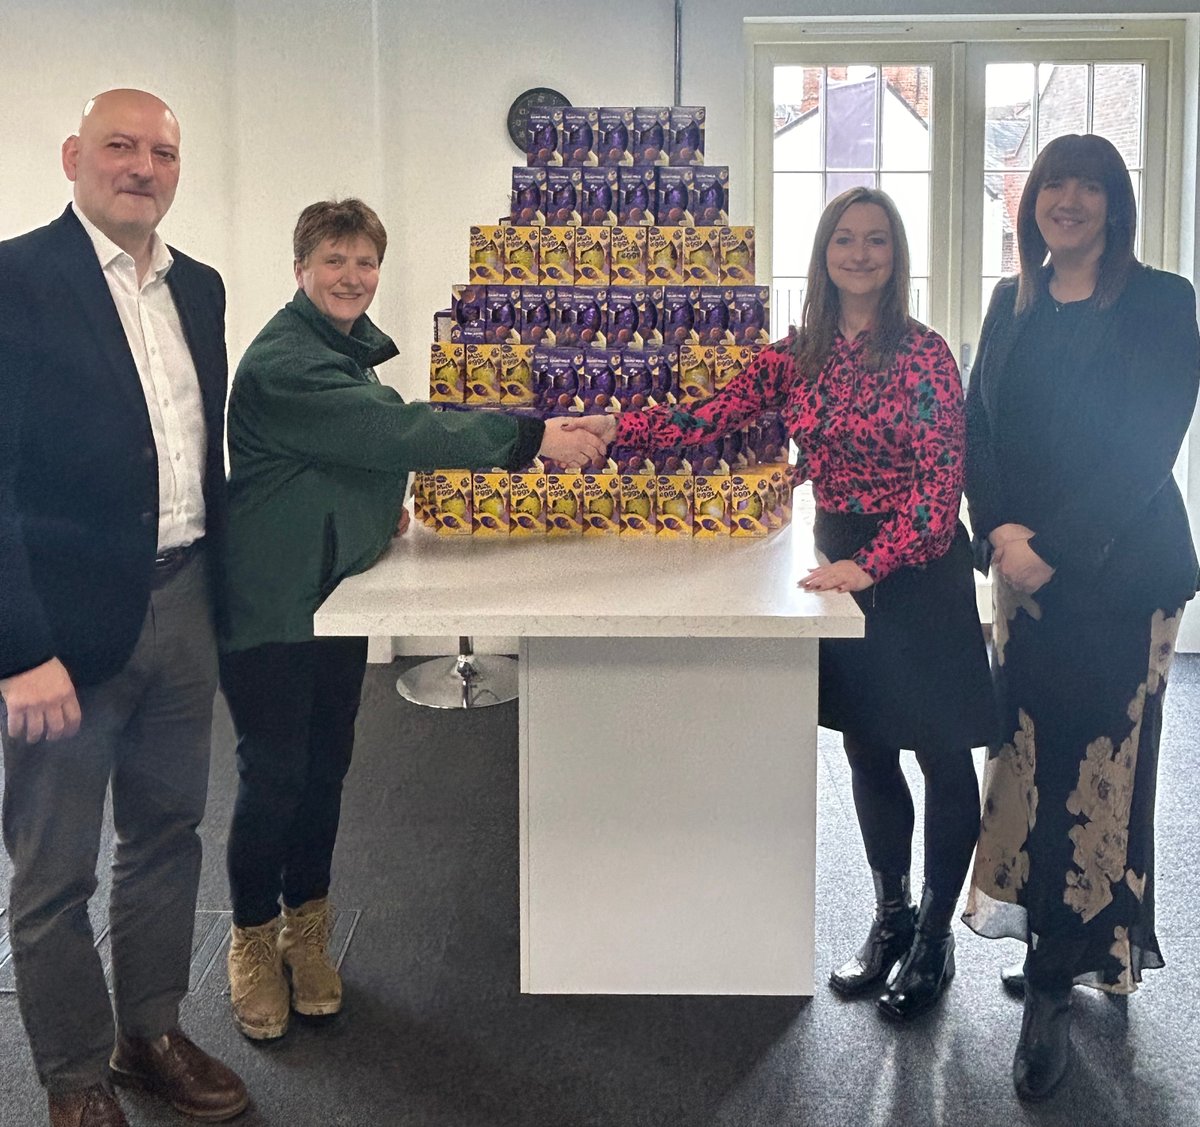 As part of our centenary celebrations, we donated 100 chocolate eggs to @HertsCommunityF to bring a smile to the faces of those in need this Easter. HCF passed them on to Borehamwood Food Bank and we hope whoever receives them has a wonderful Easter. #Chamber100 #Easter